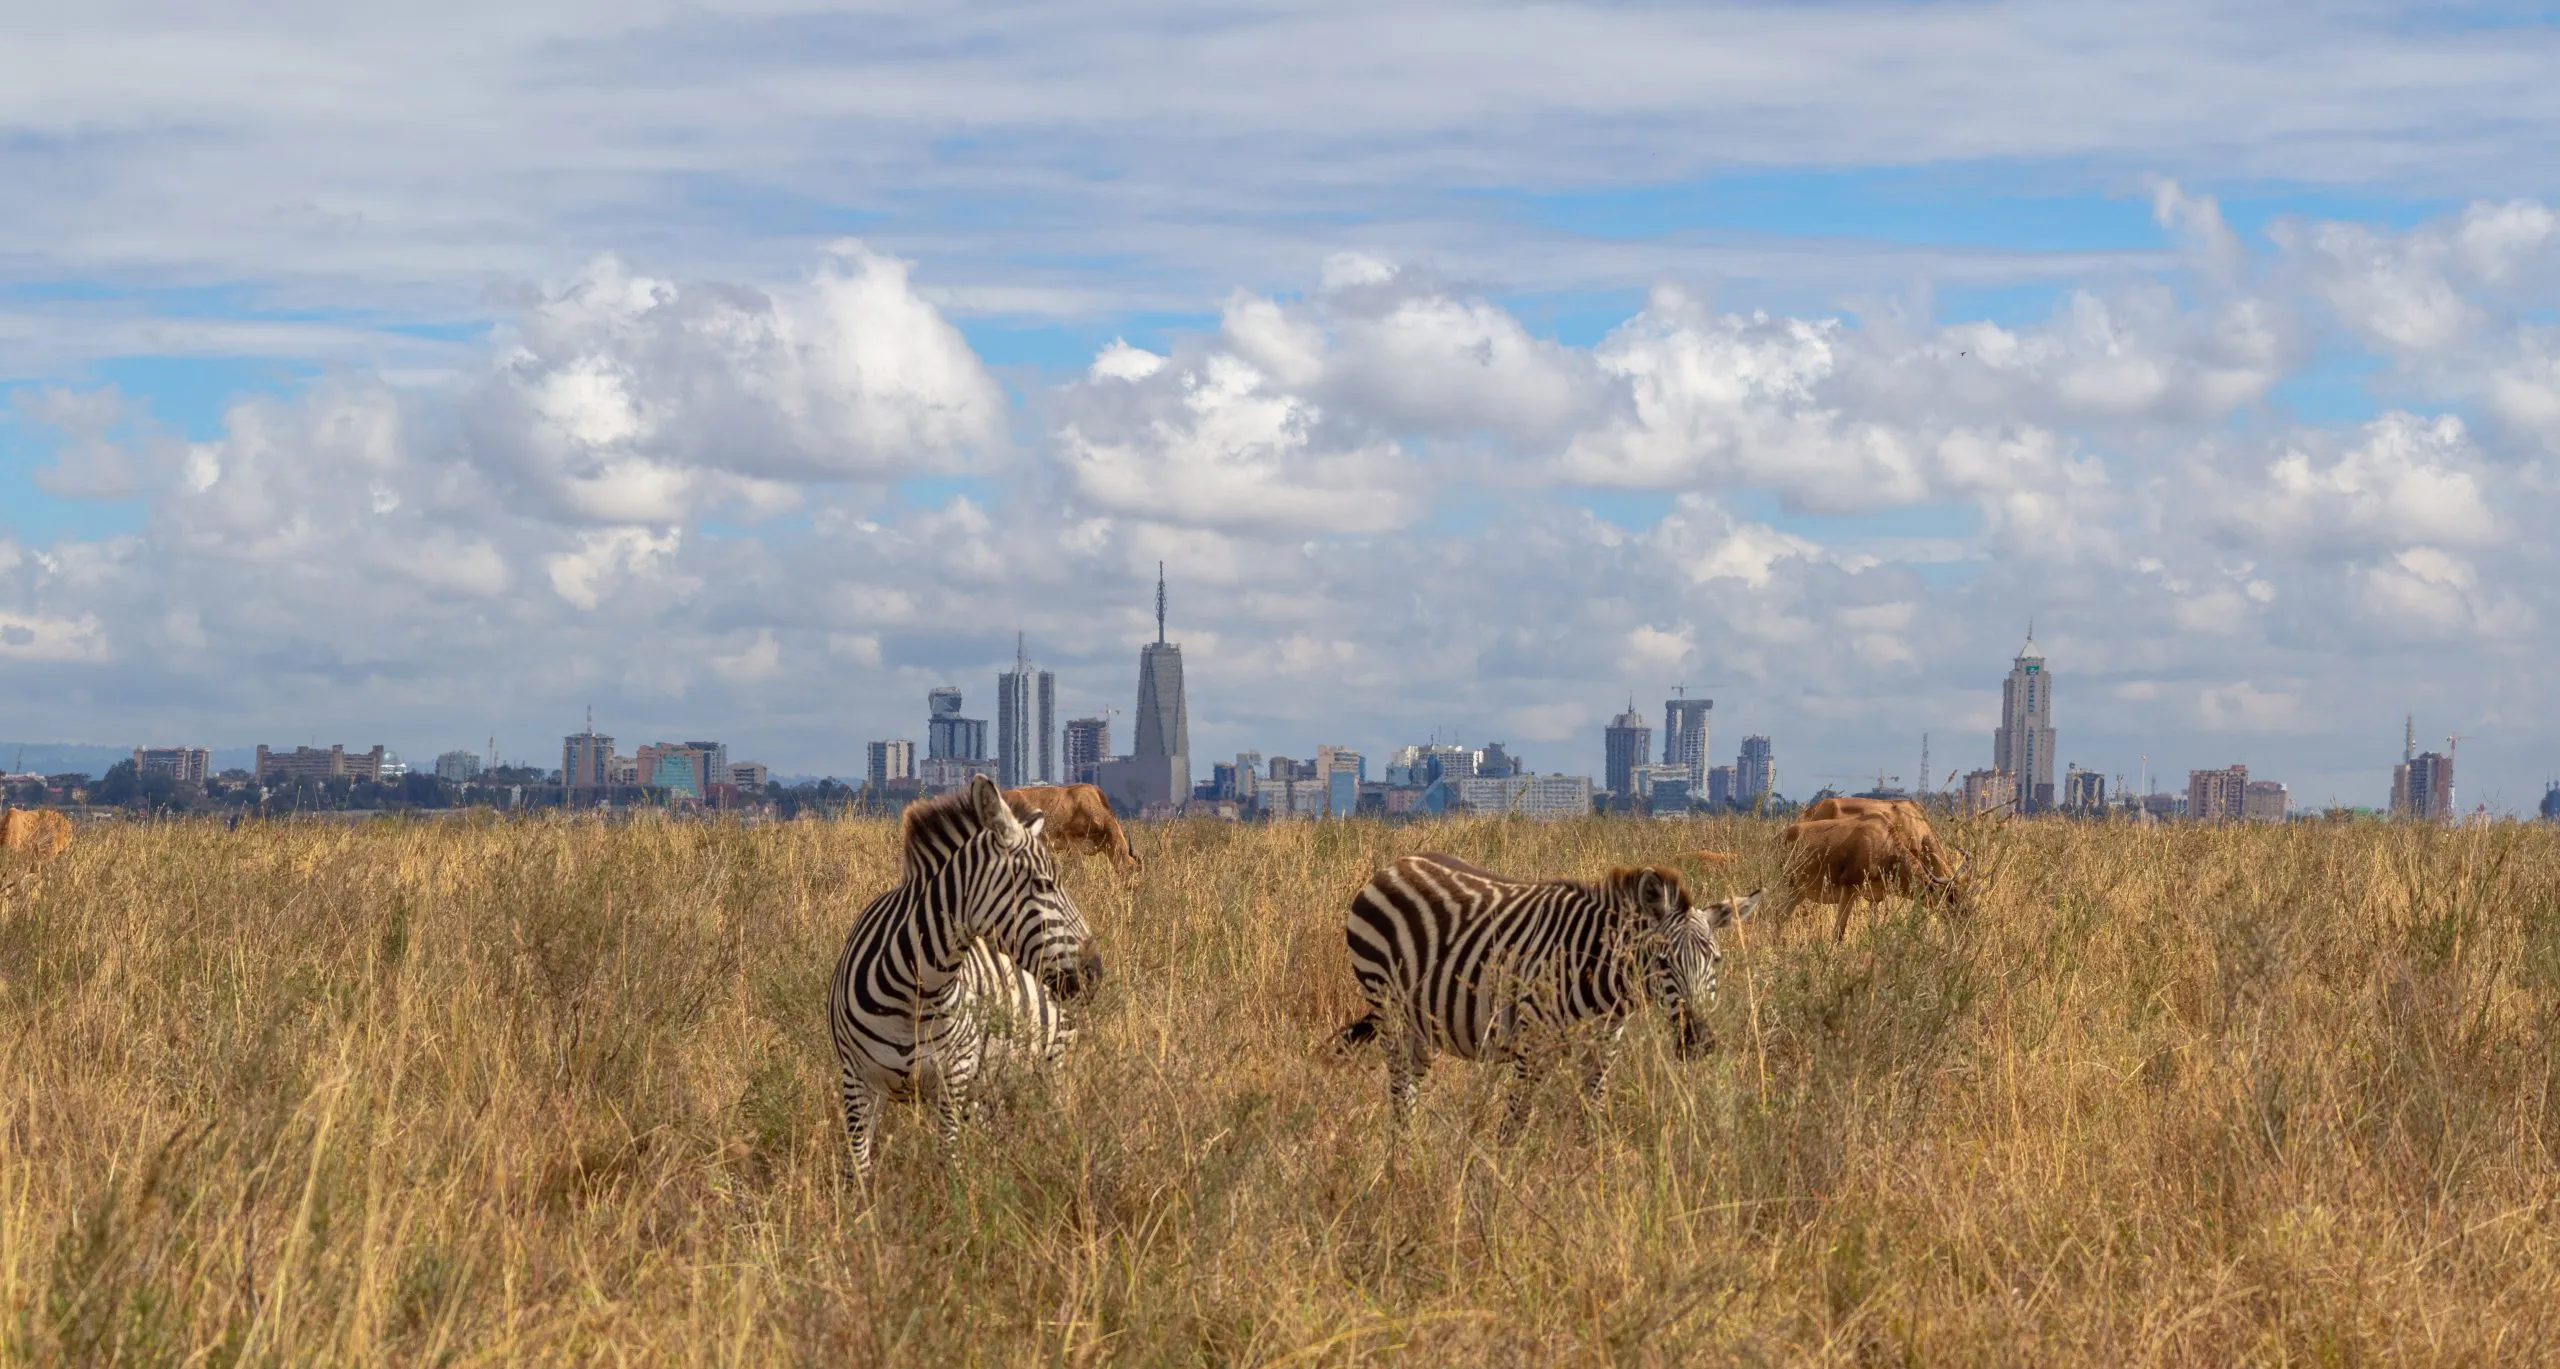 wild game and city skyline, savannah animals eat grass in Nairobi National Park, Africa, with Nairobi skyscrapers skyline panorama in the background